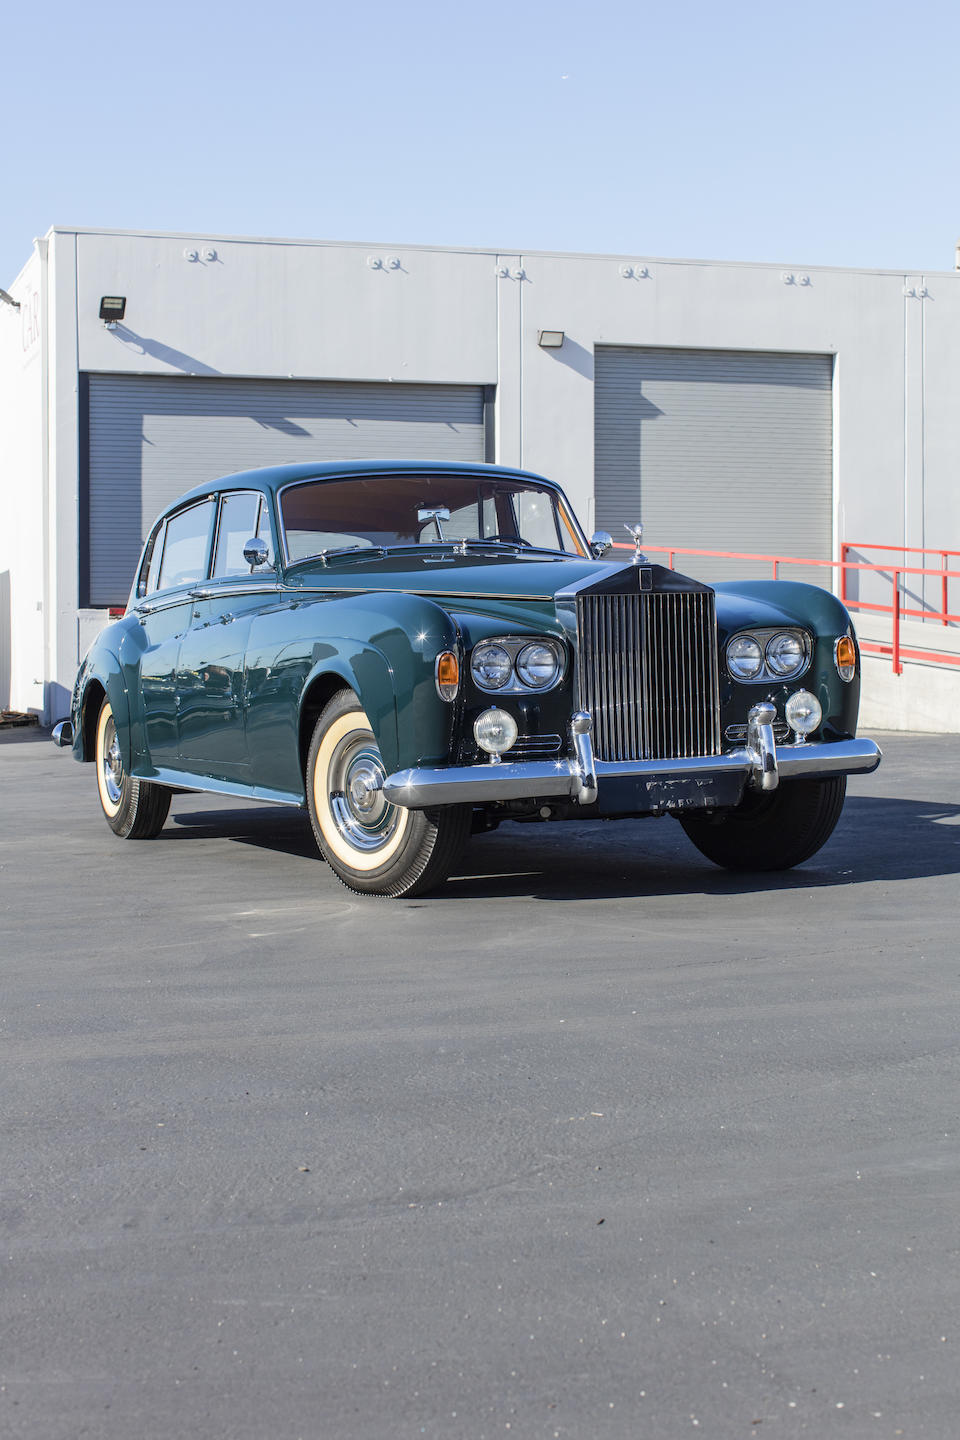 <b>1965 Rolls-Royce Silver Cloud III Long Wheelbase Touring Limousine</b><br /> Chassis no. LCEL83<br />Engine no. CL41E